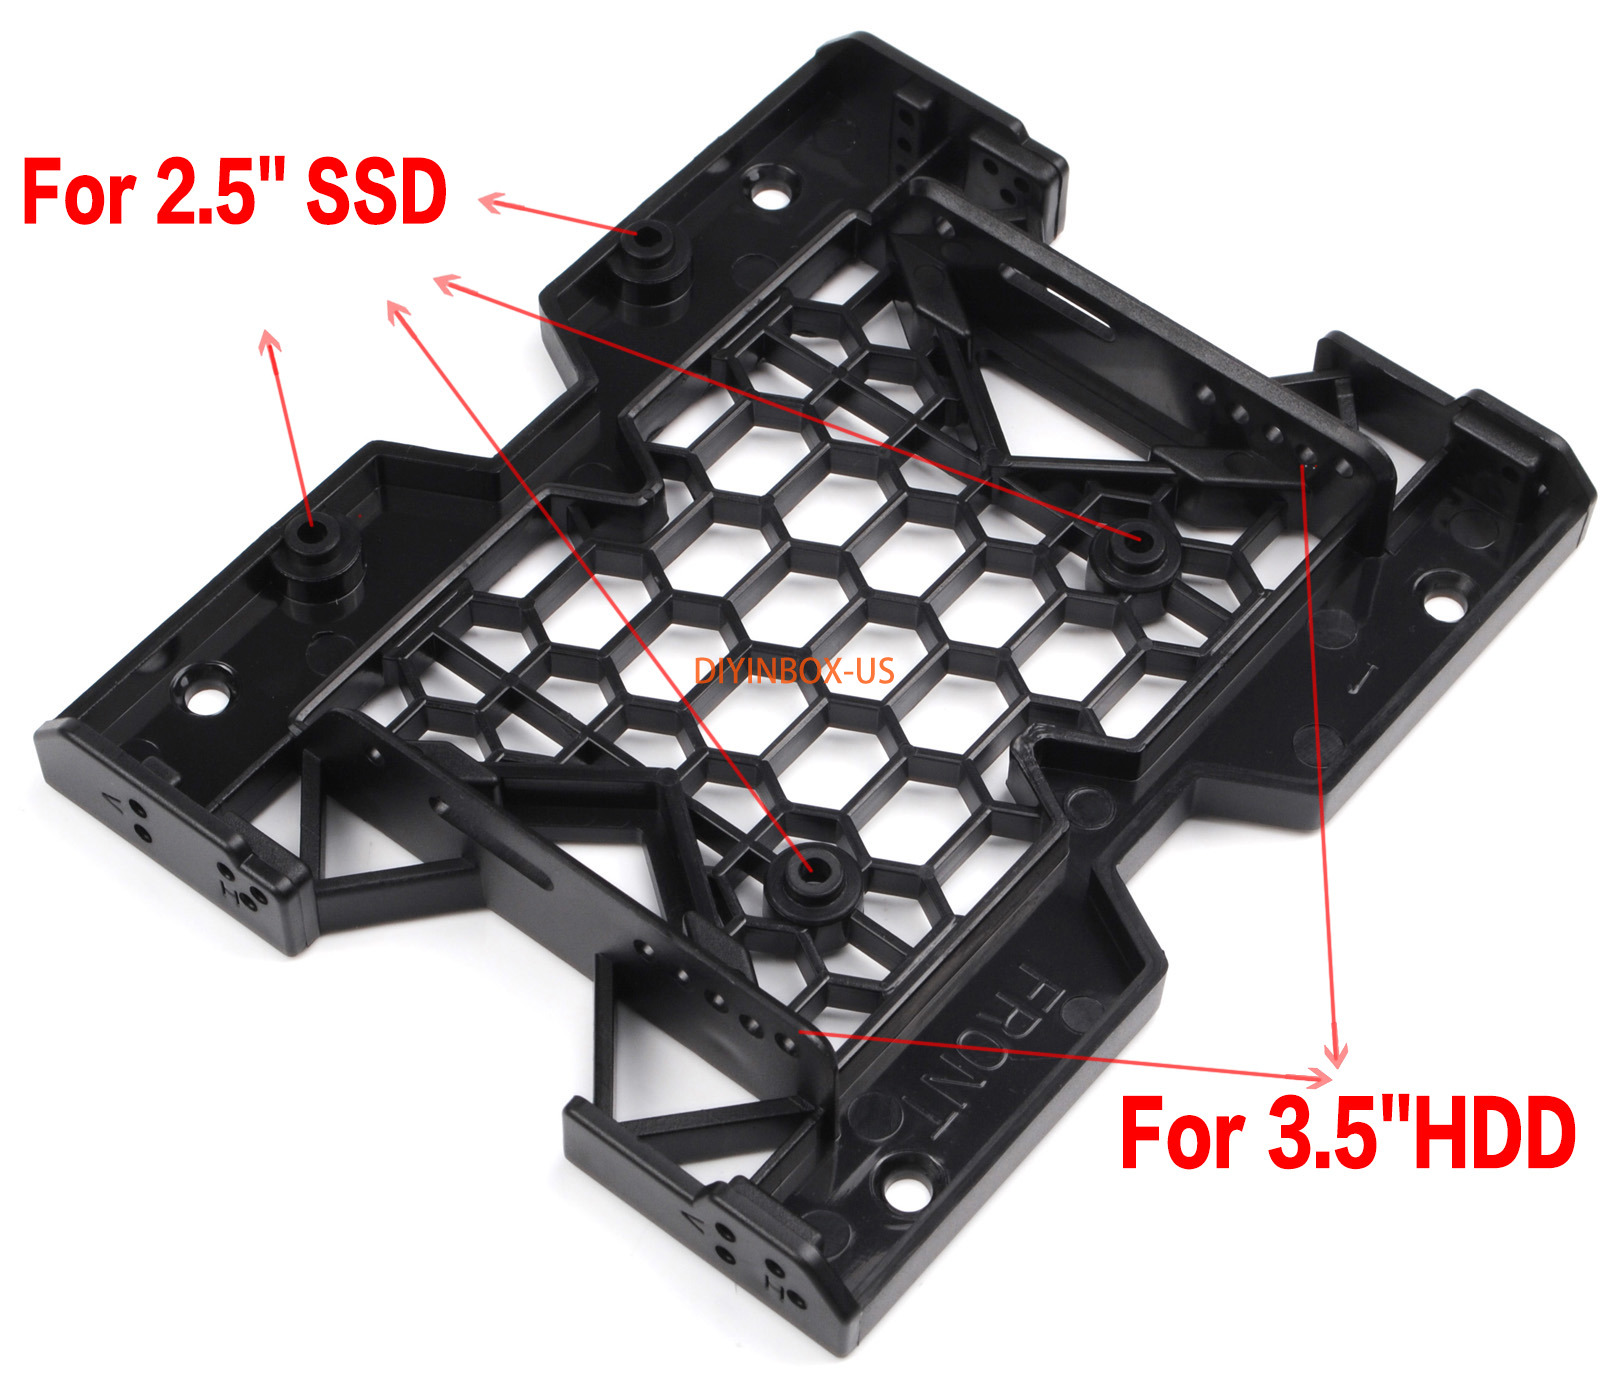 2.5 / 3.5 to 5.25 Drive Bay Computer Case Adapter HDD Mounting Bracket SSD New